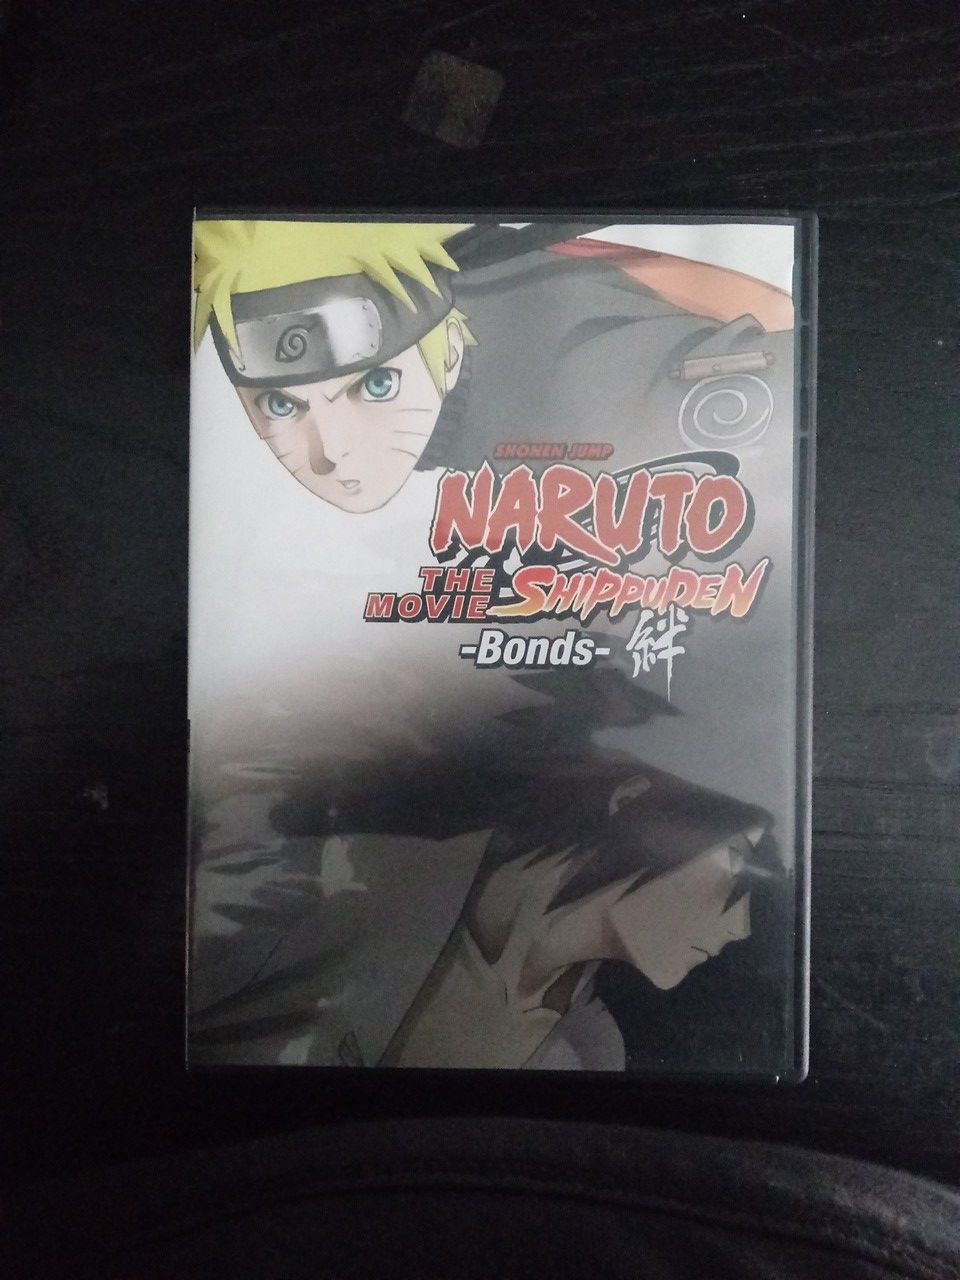 Naruto shippuden the 2nd movie for 6$